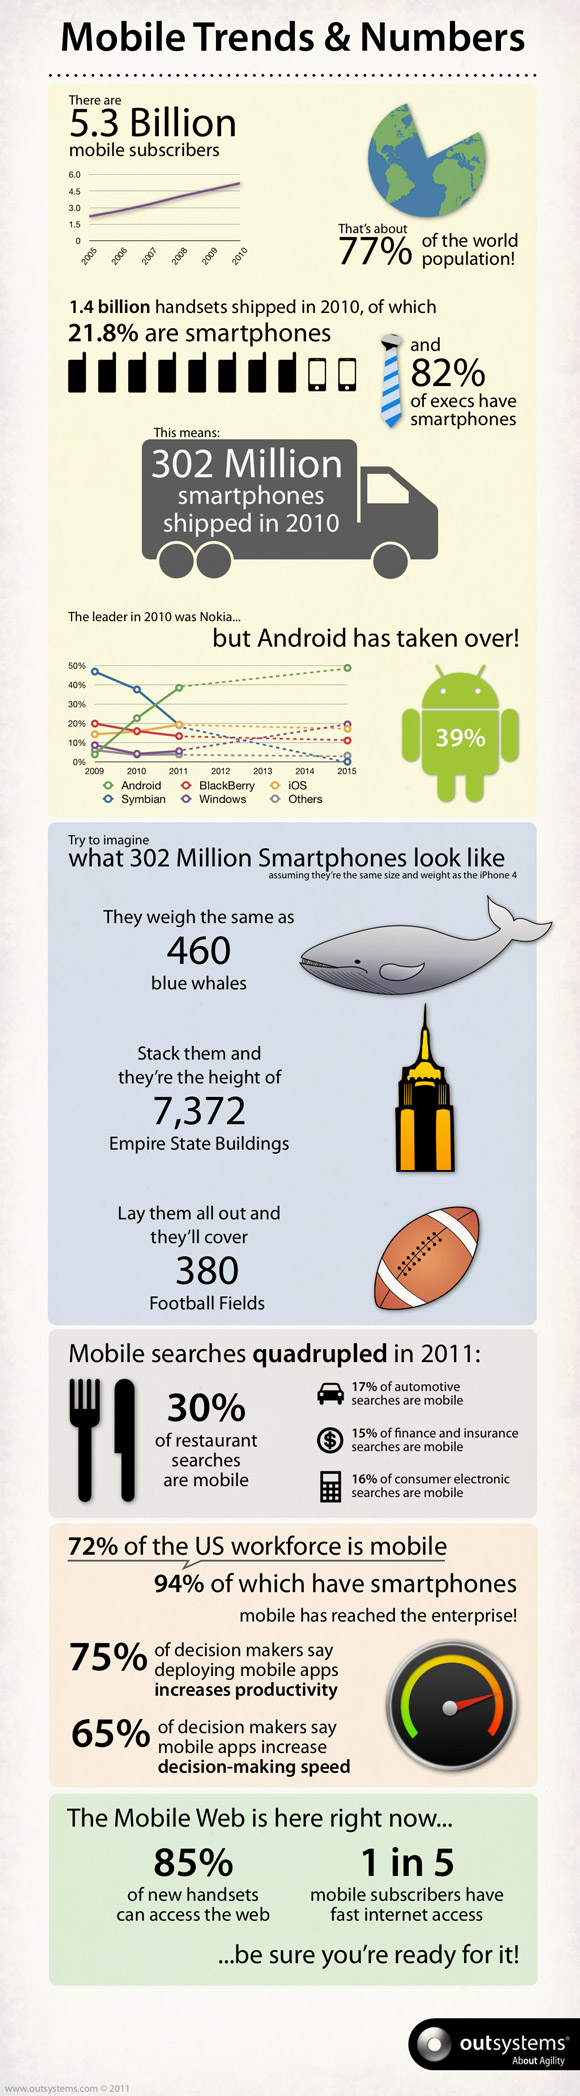 Mobile Trends and Numbers - Infographic